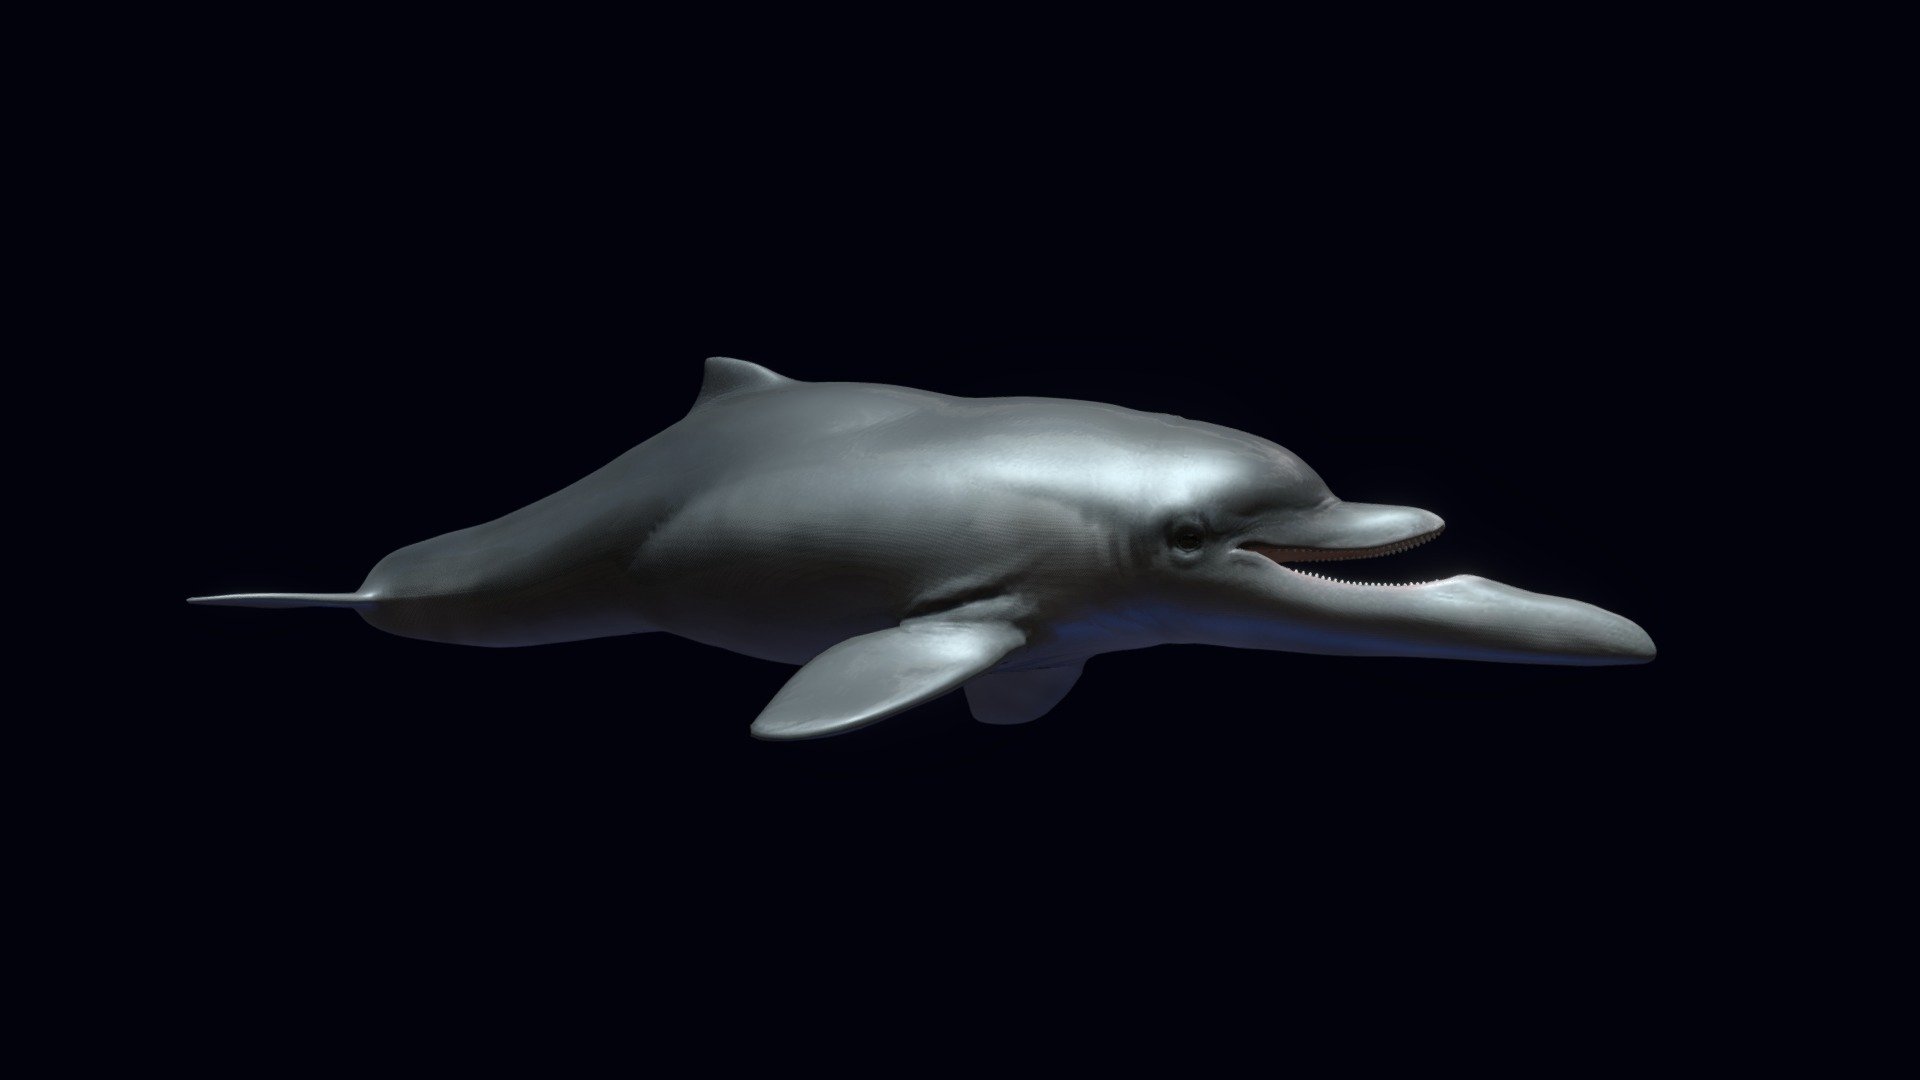 Semirostrum ceruttii is an extinct porpoise that lived between 5 and 1.5 million years ago, during the Pliocene. The species is highly distinctive due to the extremely long symphysis on the lower jaw

This reconstuction is a work in progress 3d model